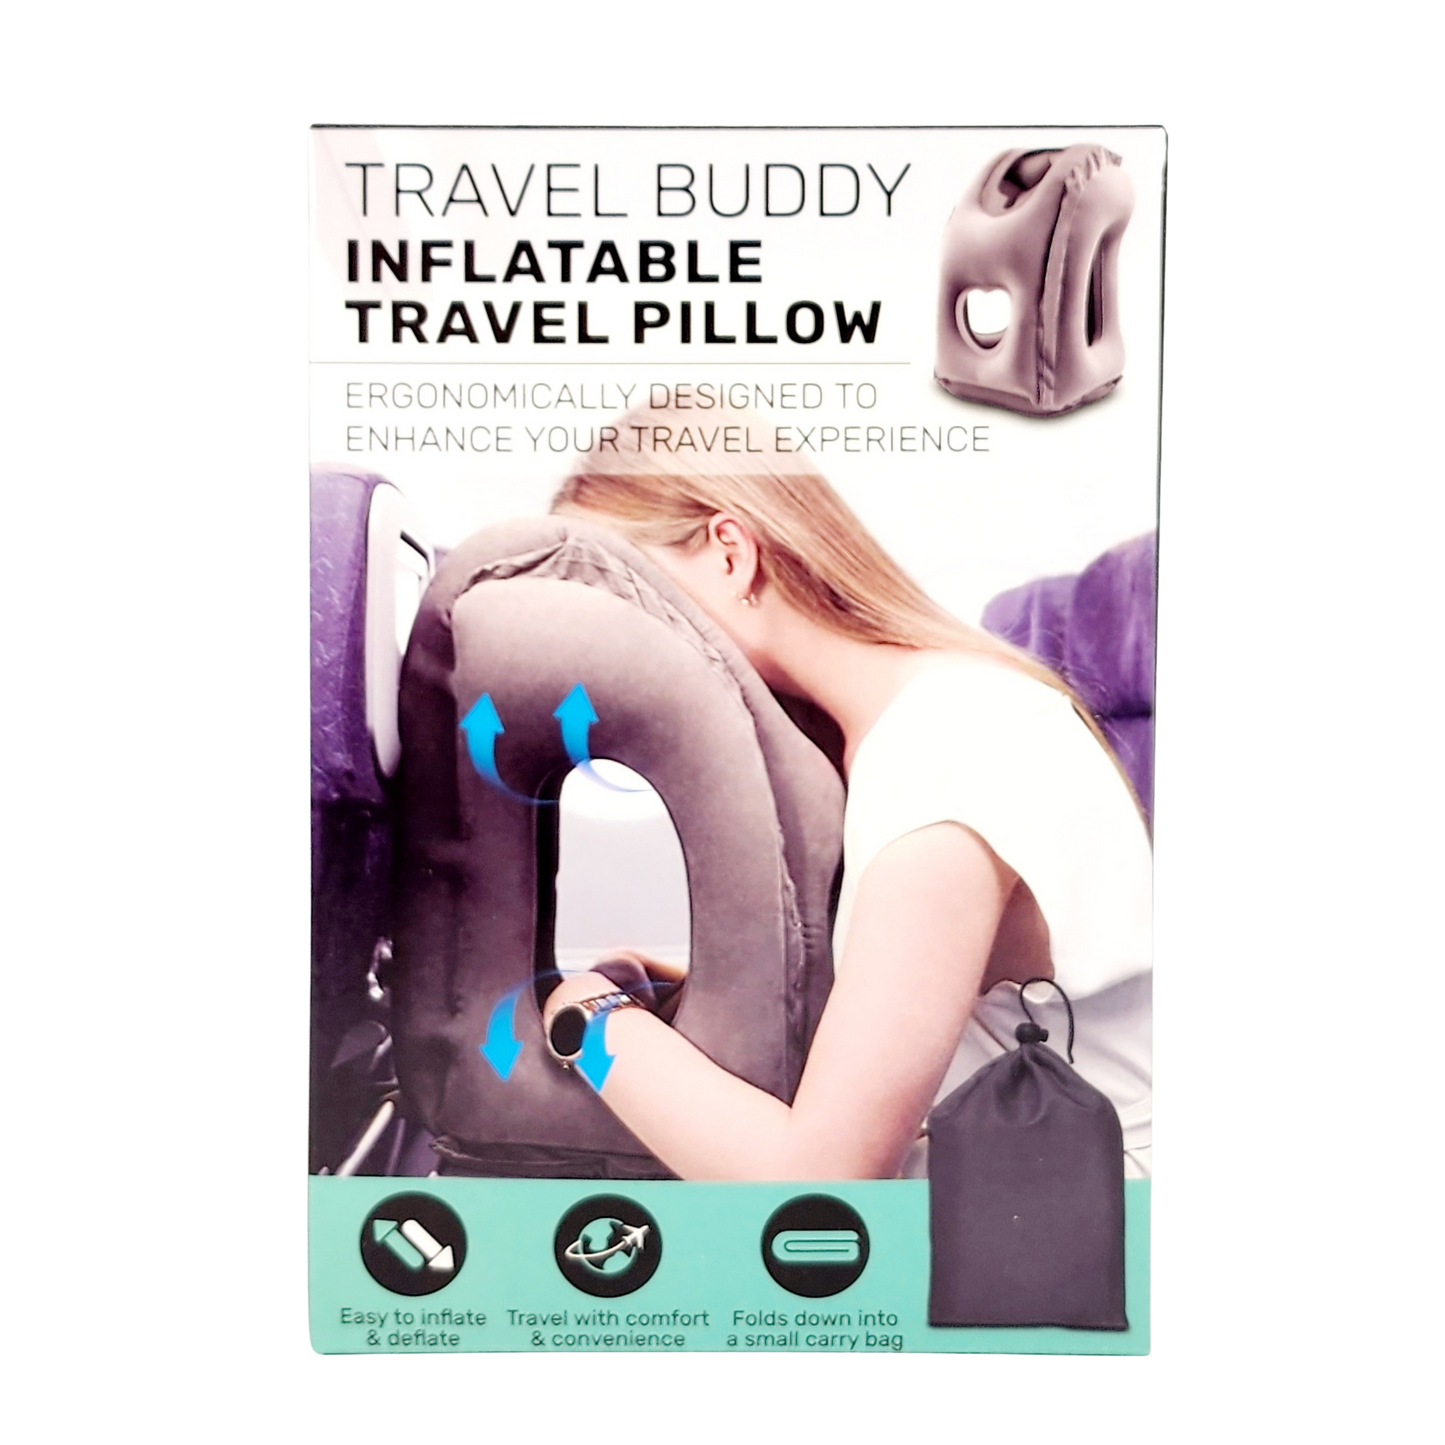 Travel Buddy Inflatable Travel Pillow